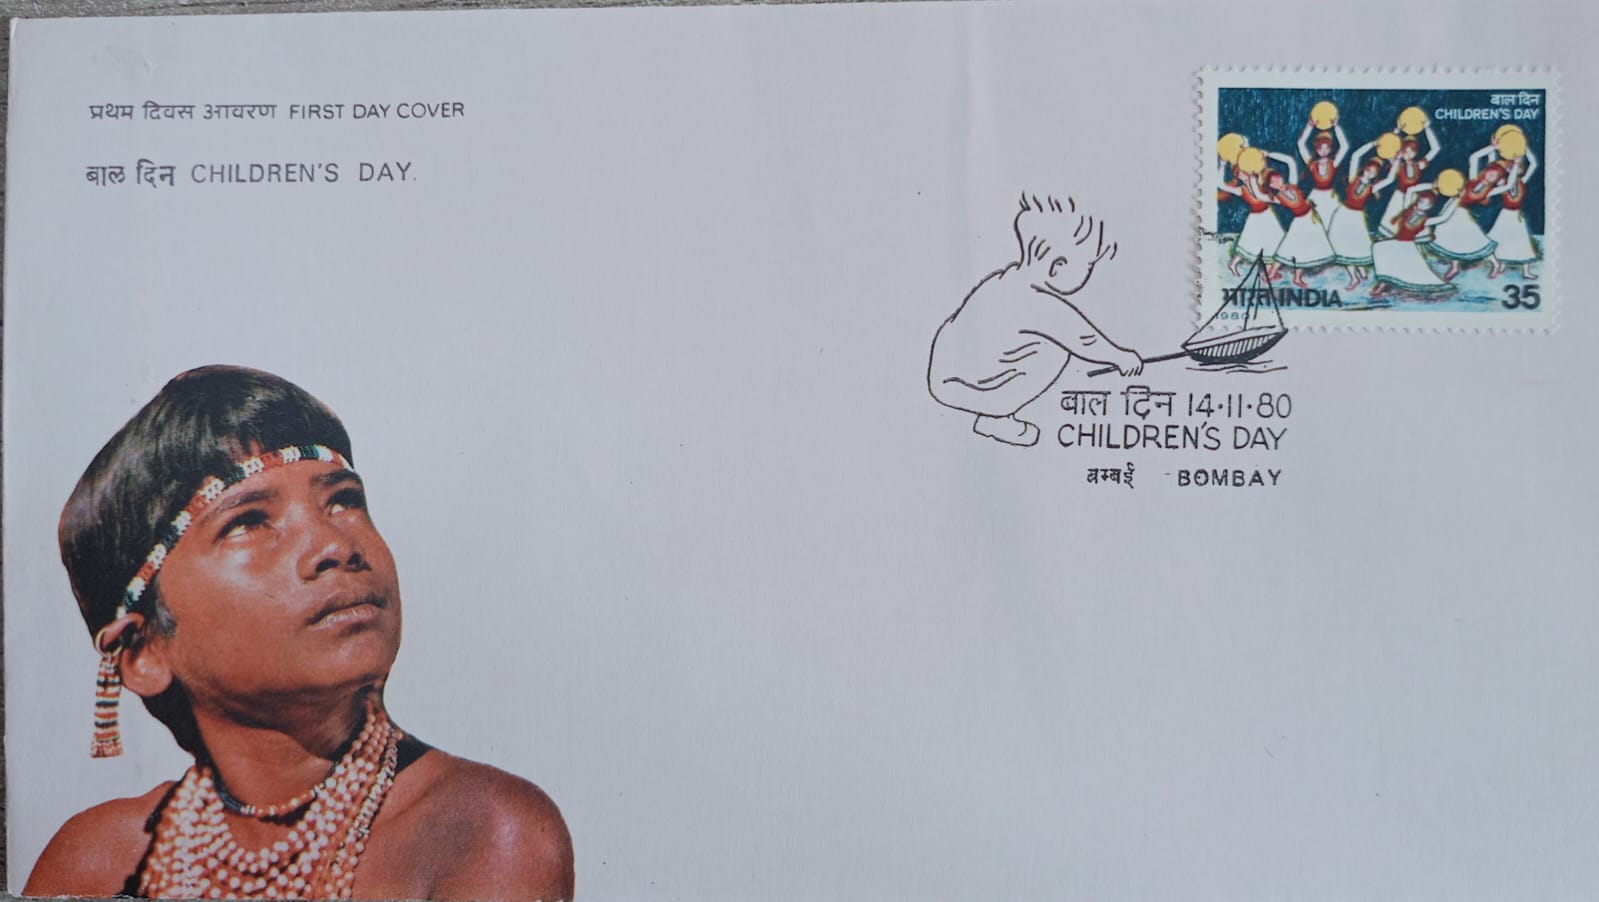 India 1980 Children's Day First Day Cover